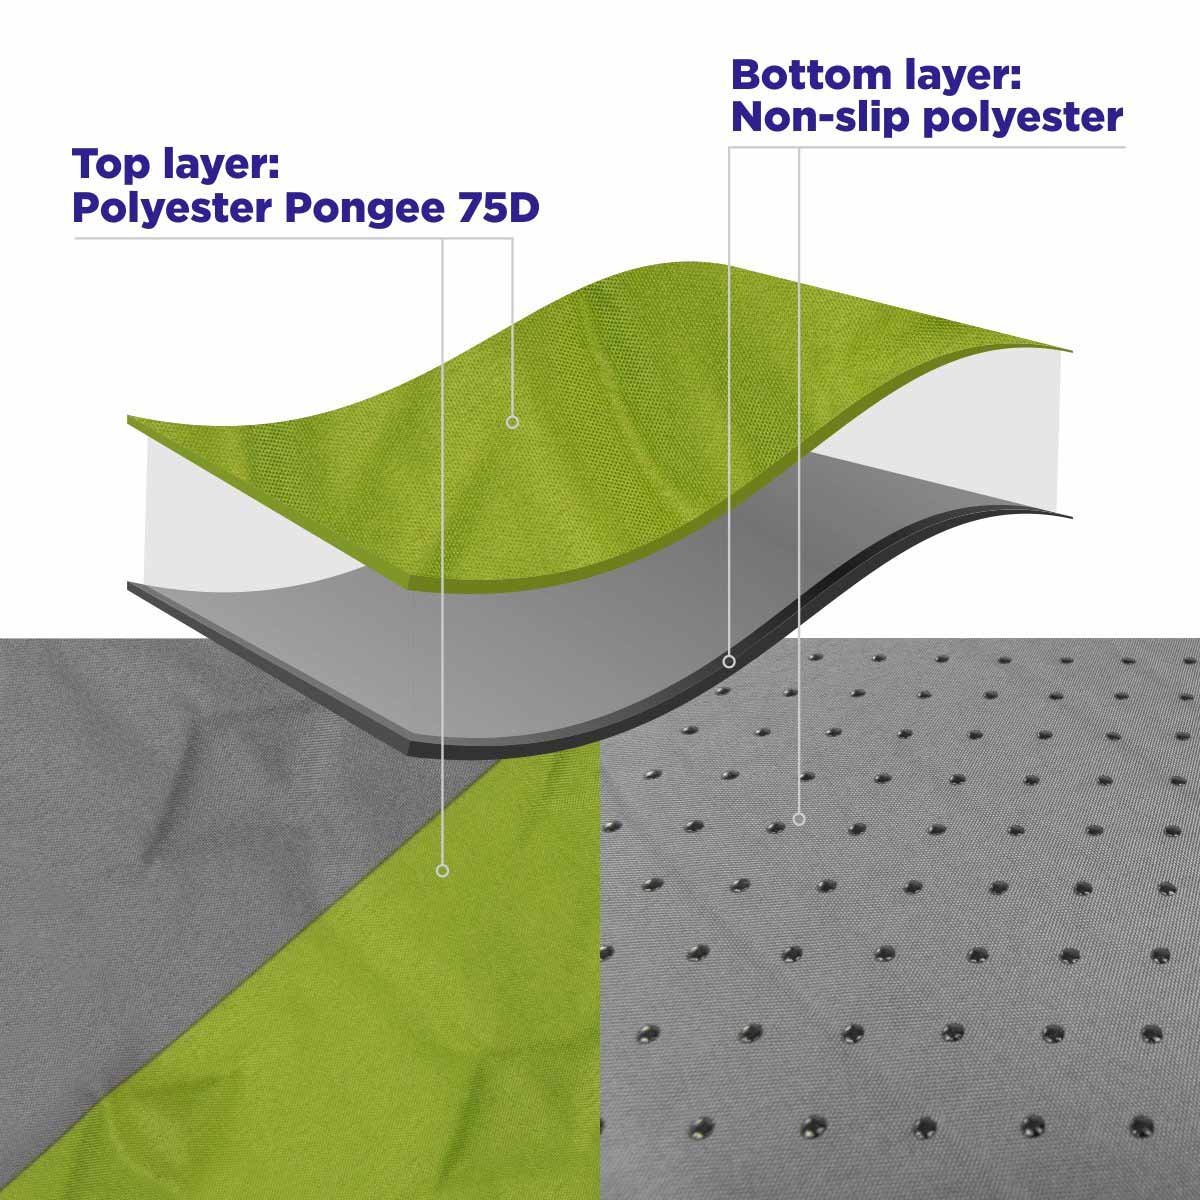 2-inch Lightweight Self Inflating Camping Sleeping Pad is made of polyester pongee 75D (top layer) and non-slip polyester (bottom layer